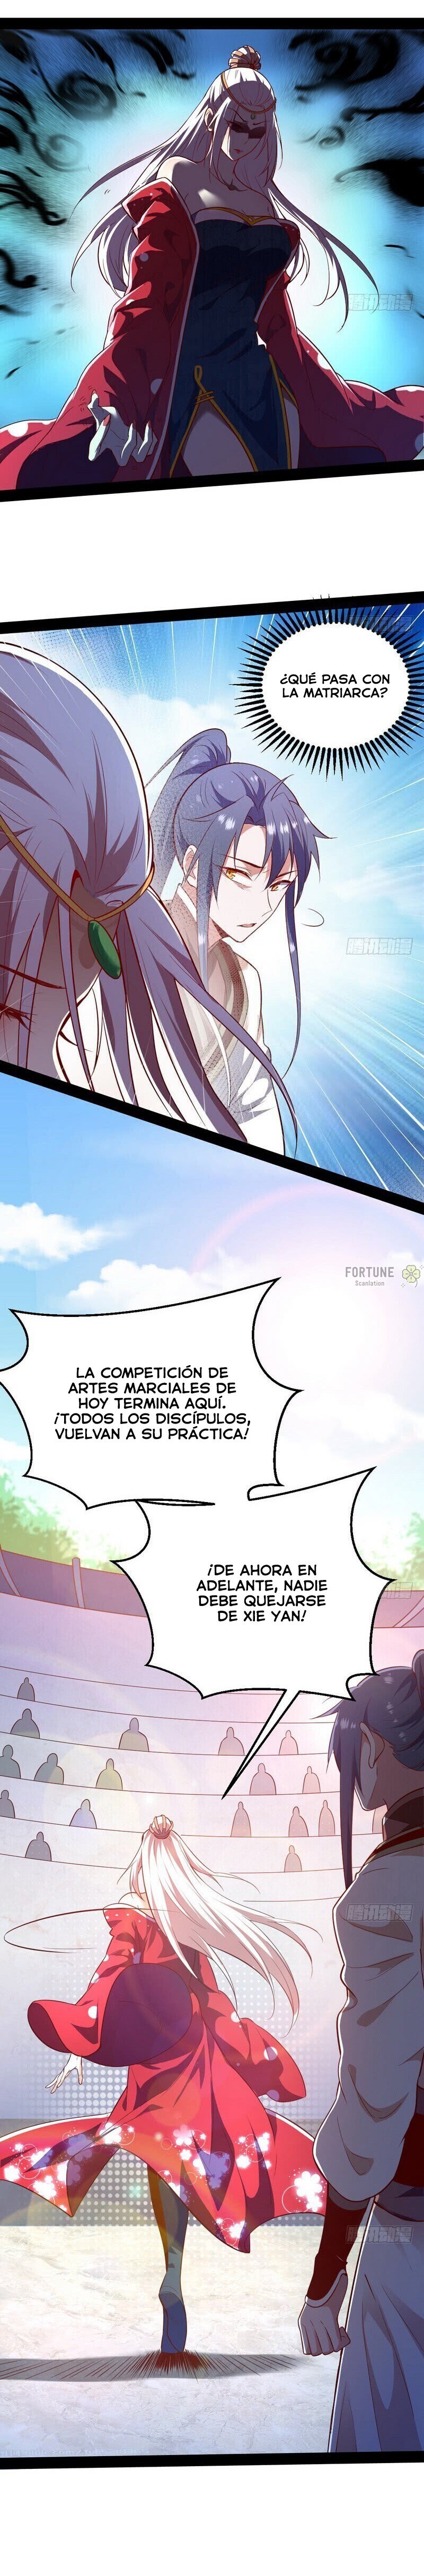 Manga Soy un dios maligno Chapter 16 image number 23